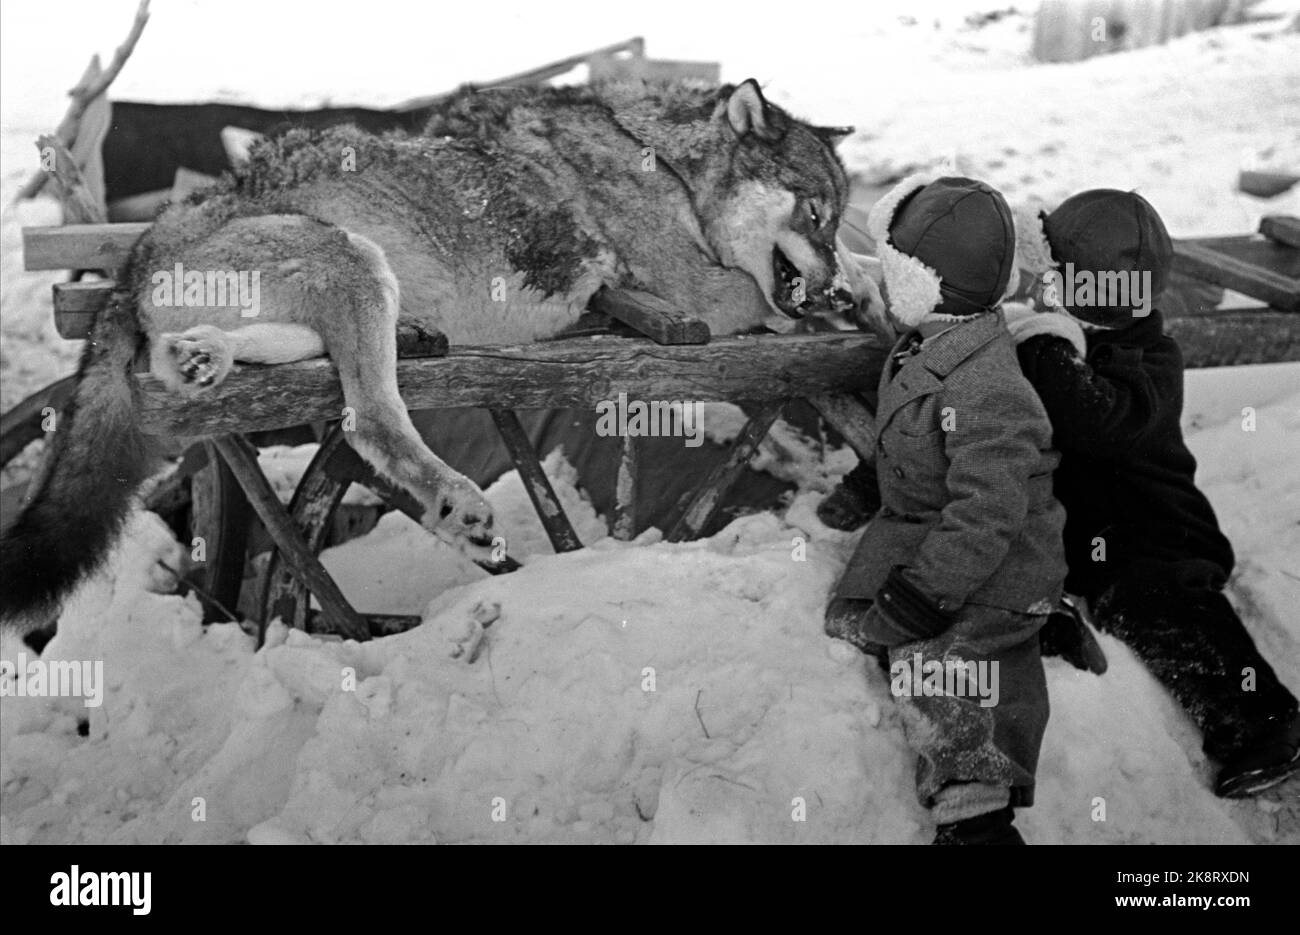 Finnmark in the winter of 1949. Extensive wolf hunting on Finnmarksvidda. The Ministry of Agriculture allocated money to hunt wolves in Finnmark after large flocks of reindeer had been damaged by wolves. The action used local and hired hunters as well as flights and belt cars, but in 10 days only managed to shoot eight wolves. Here one of the dead wolves that lay on the 'Parade' at the church site for a week, and is admired here by two little boys. Photo: Sverre A. Børretzen / Current / NTB Stock Photo